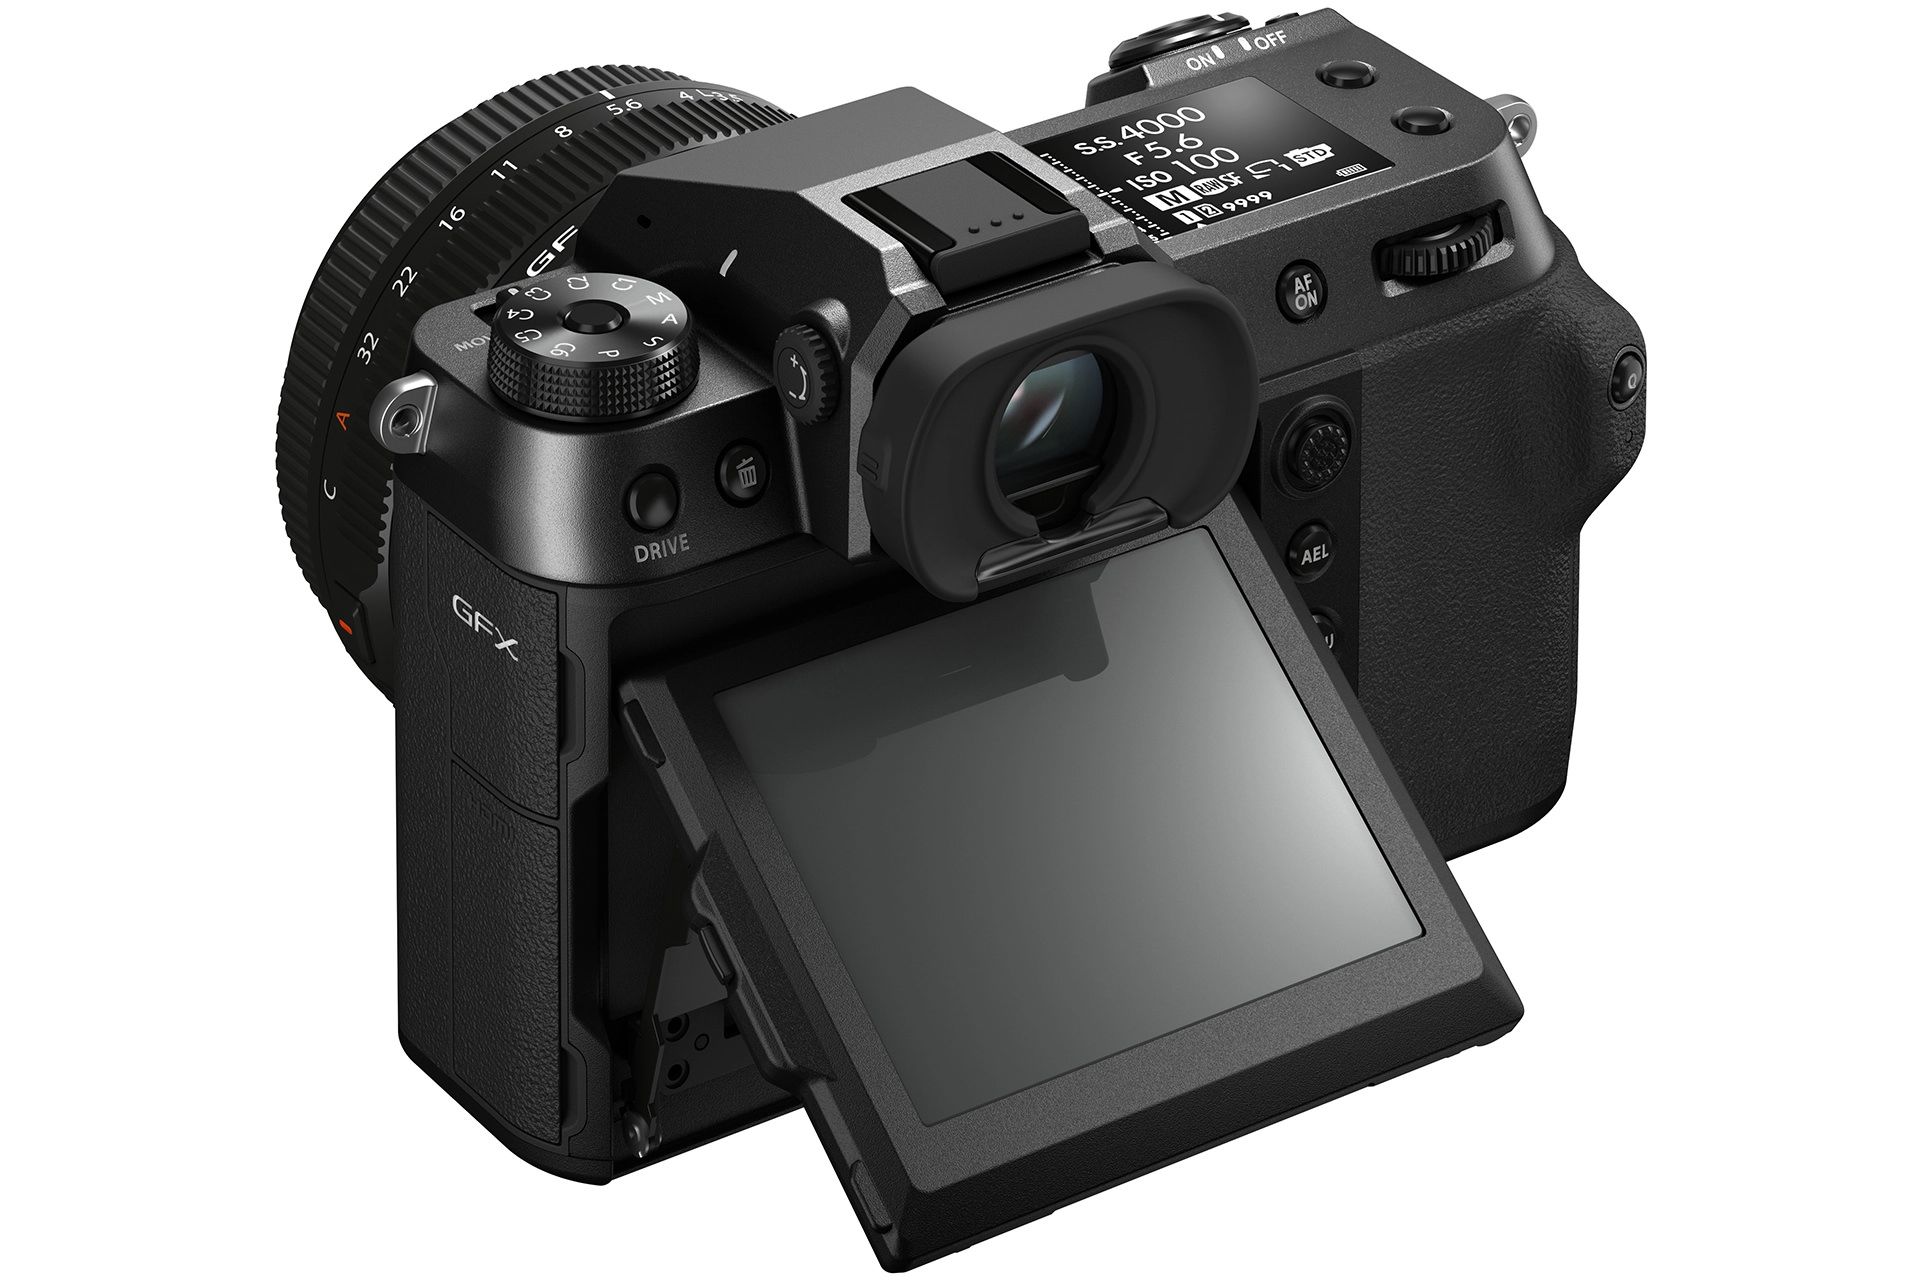 The back of the Fujifilm GFX100S camera with LCD display